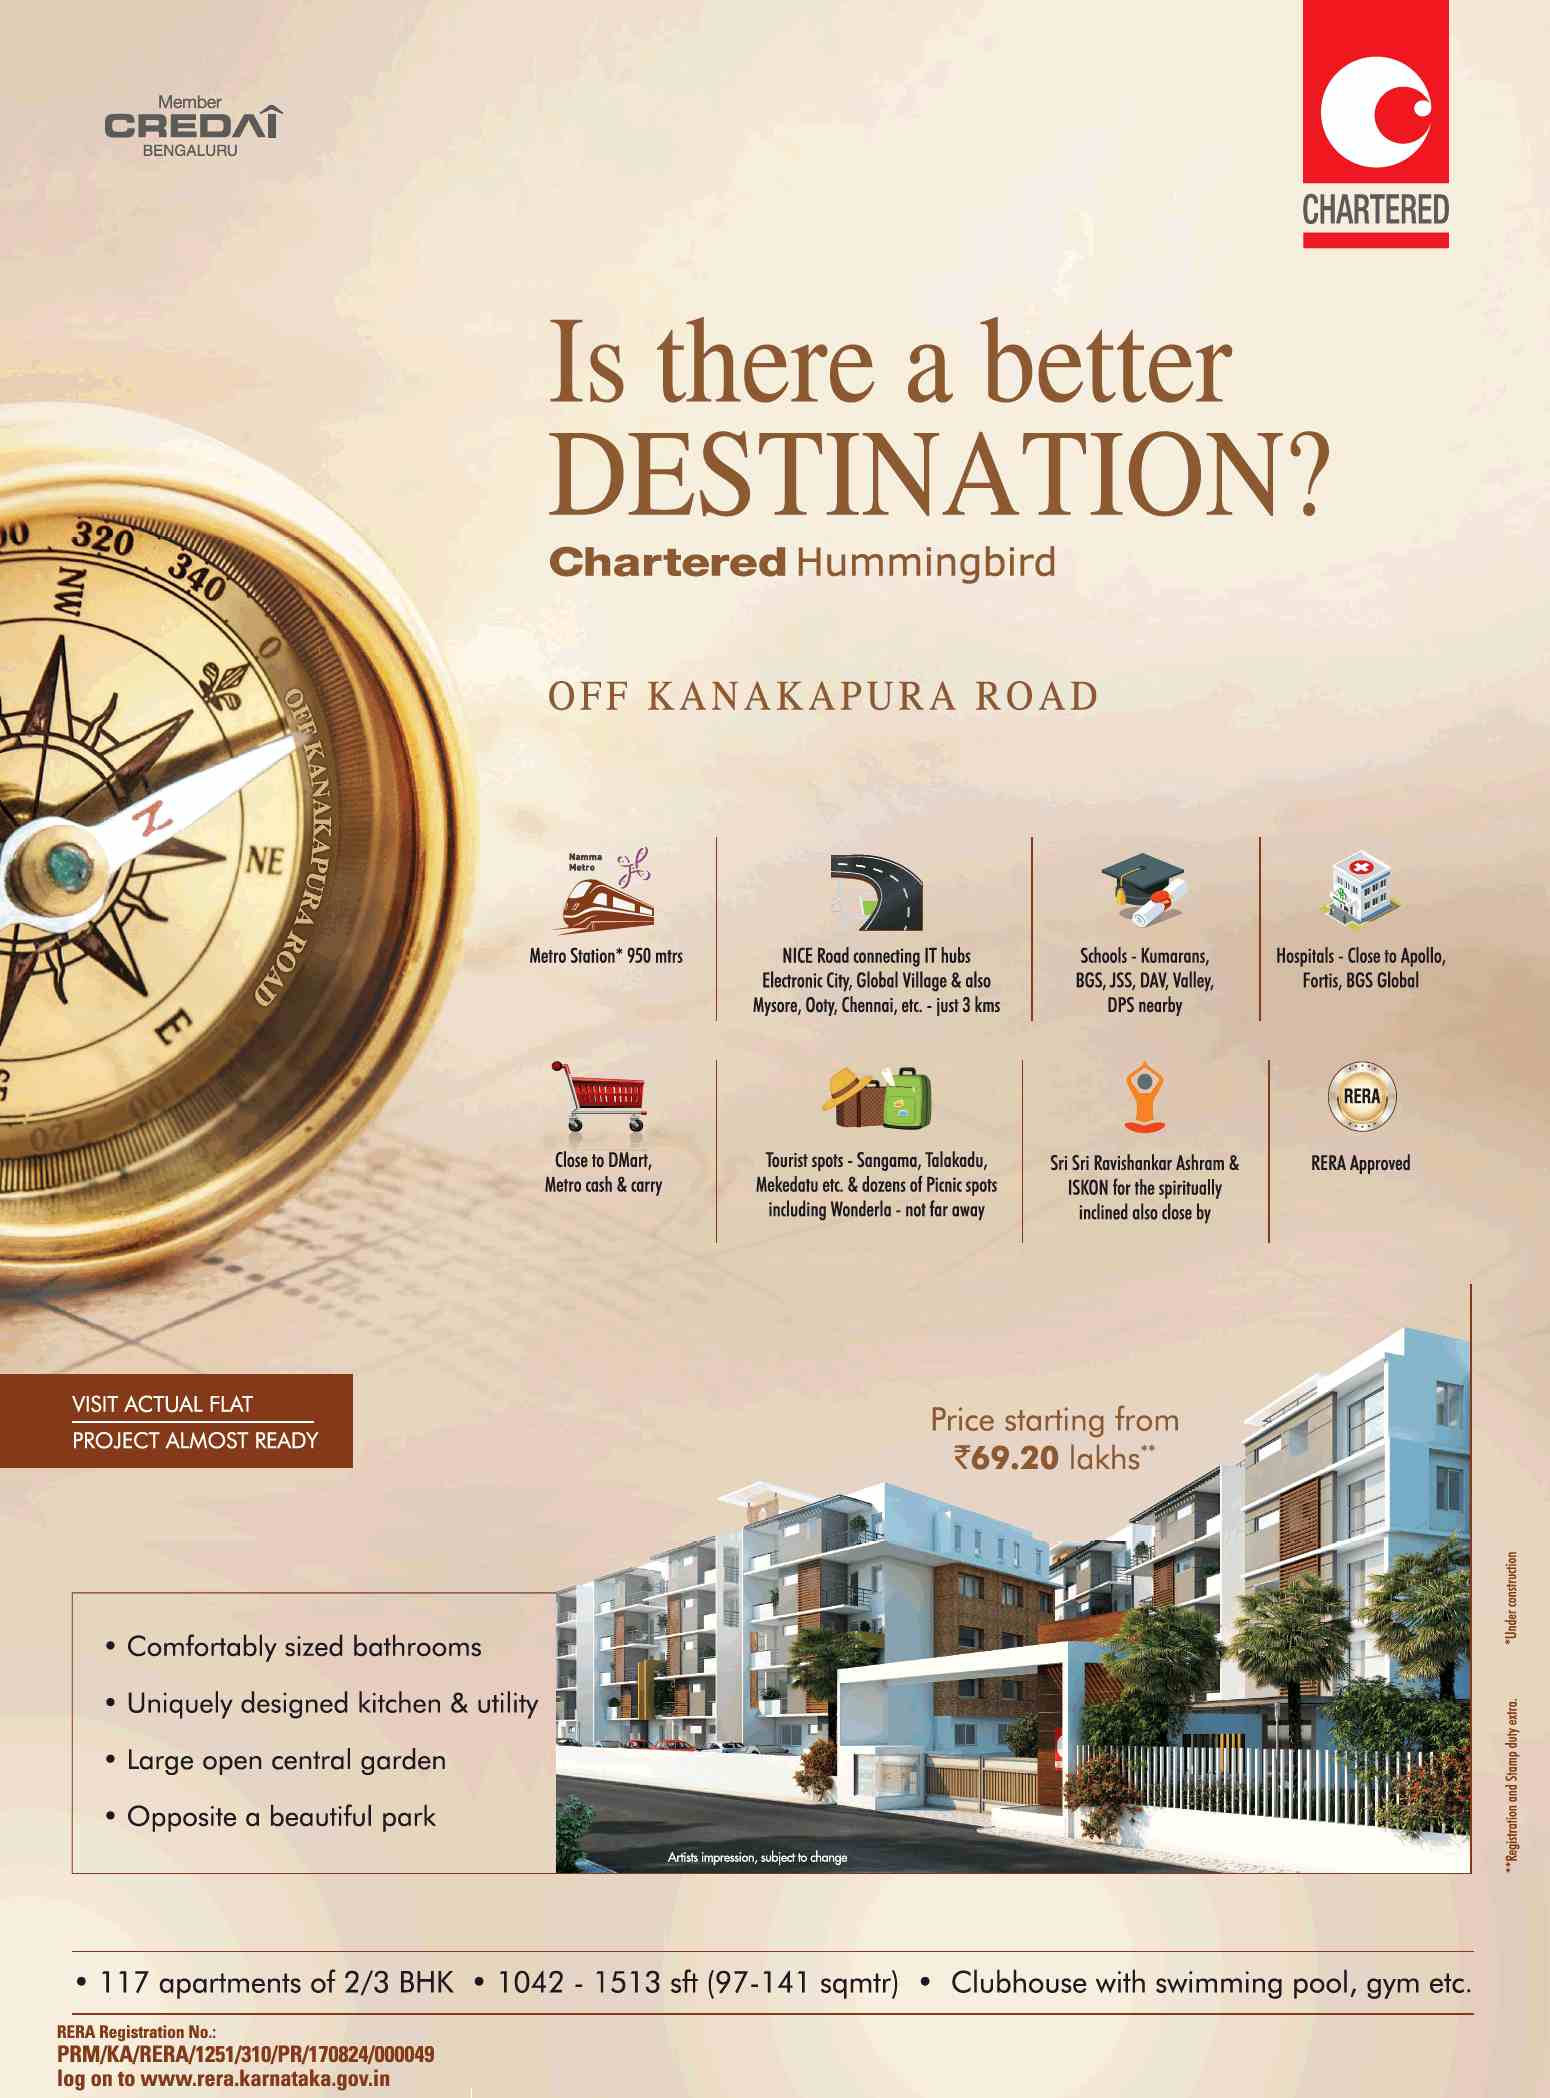 Book home with best destination @ Rs 69.20 Lakh at Chartered Hummingbird in Bangalore Update